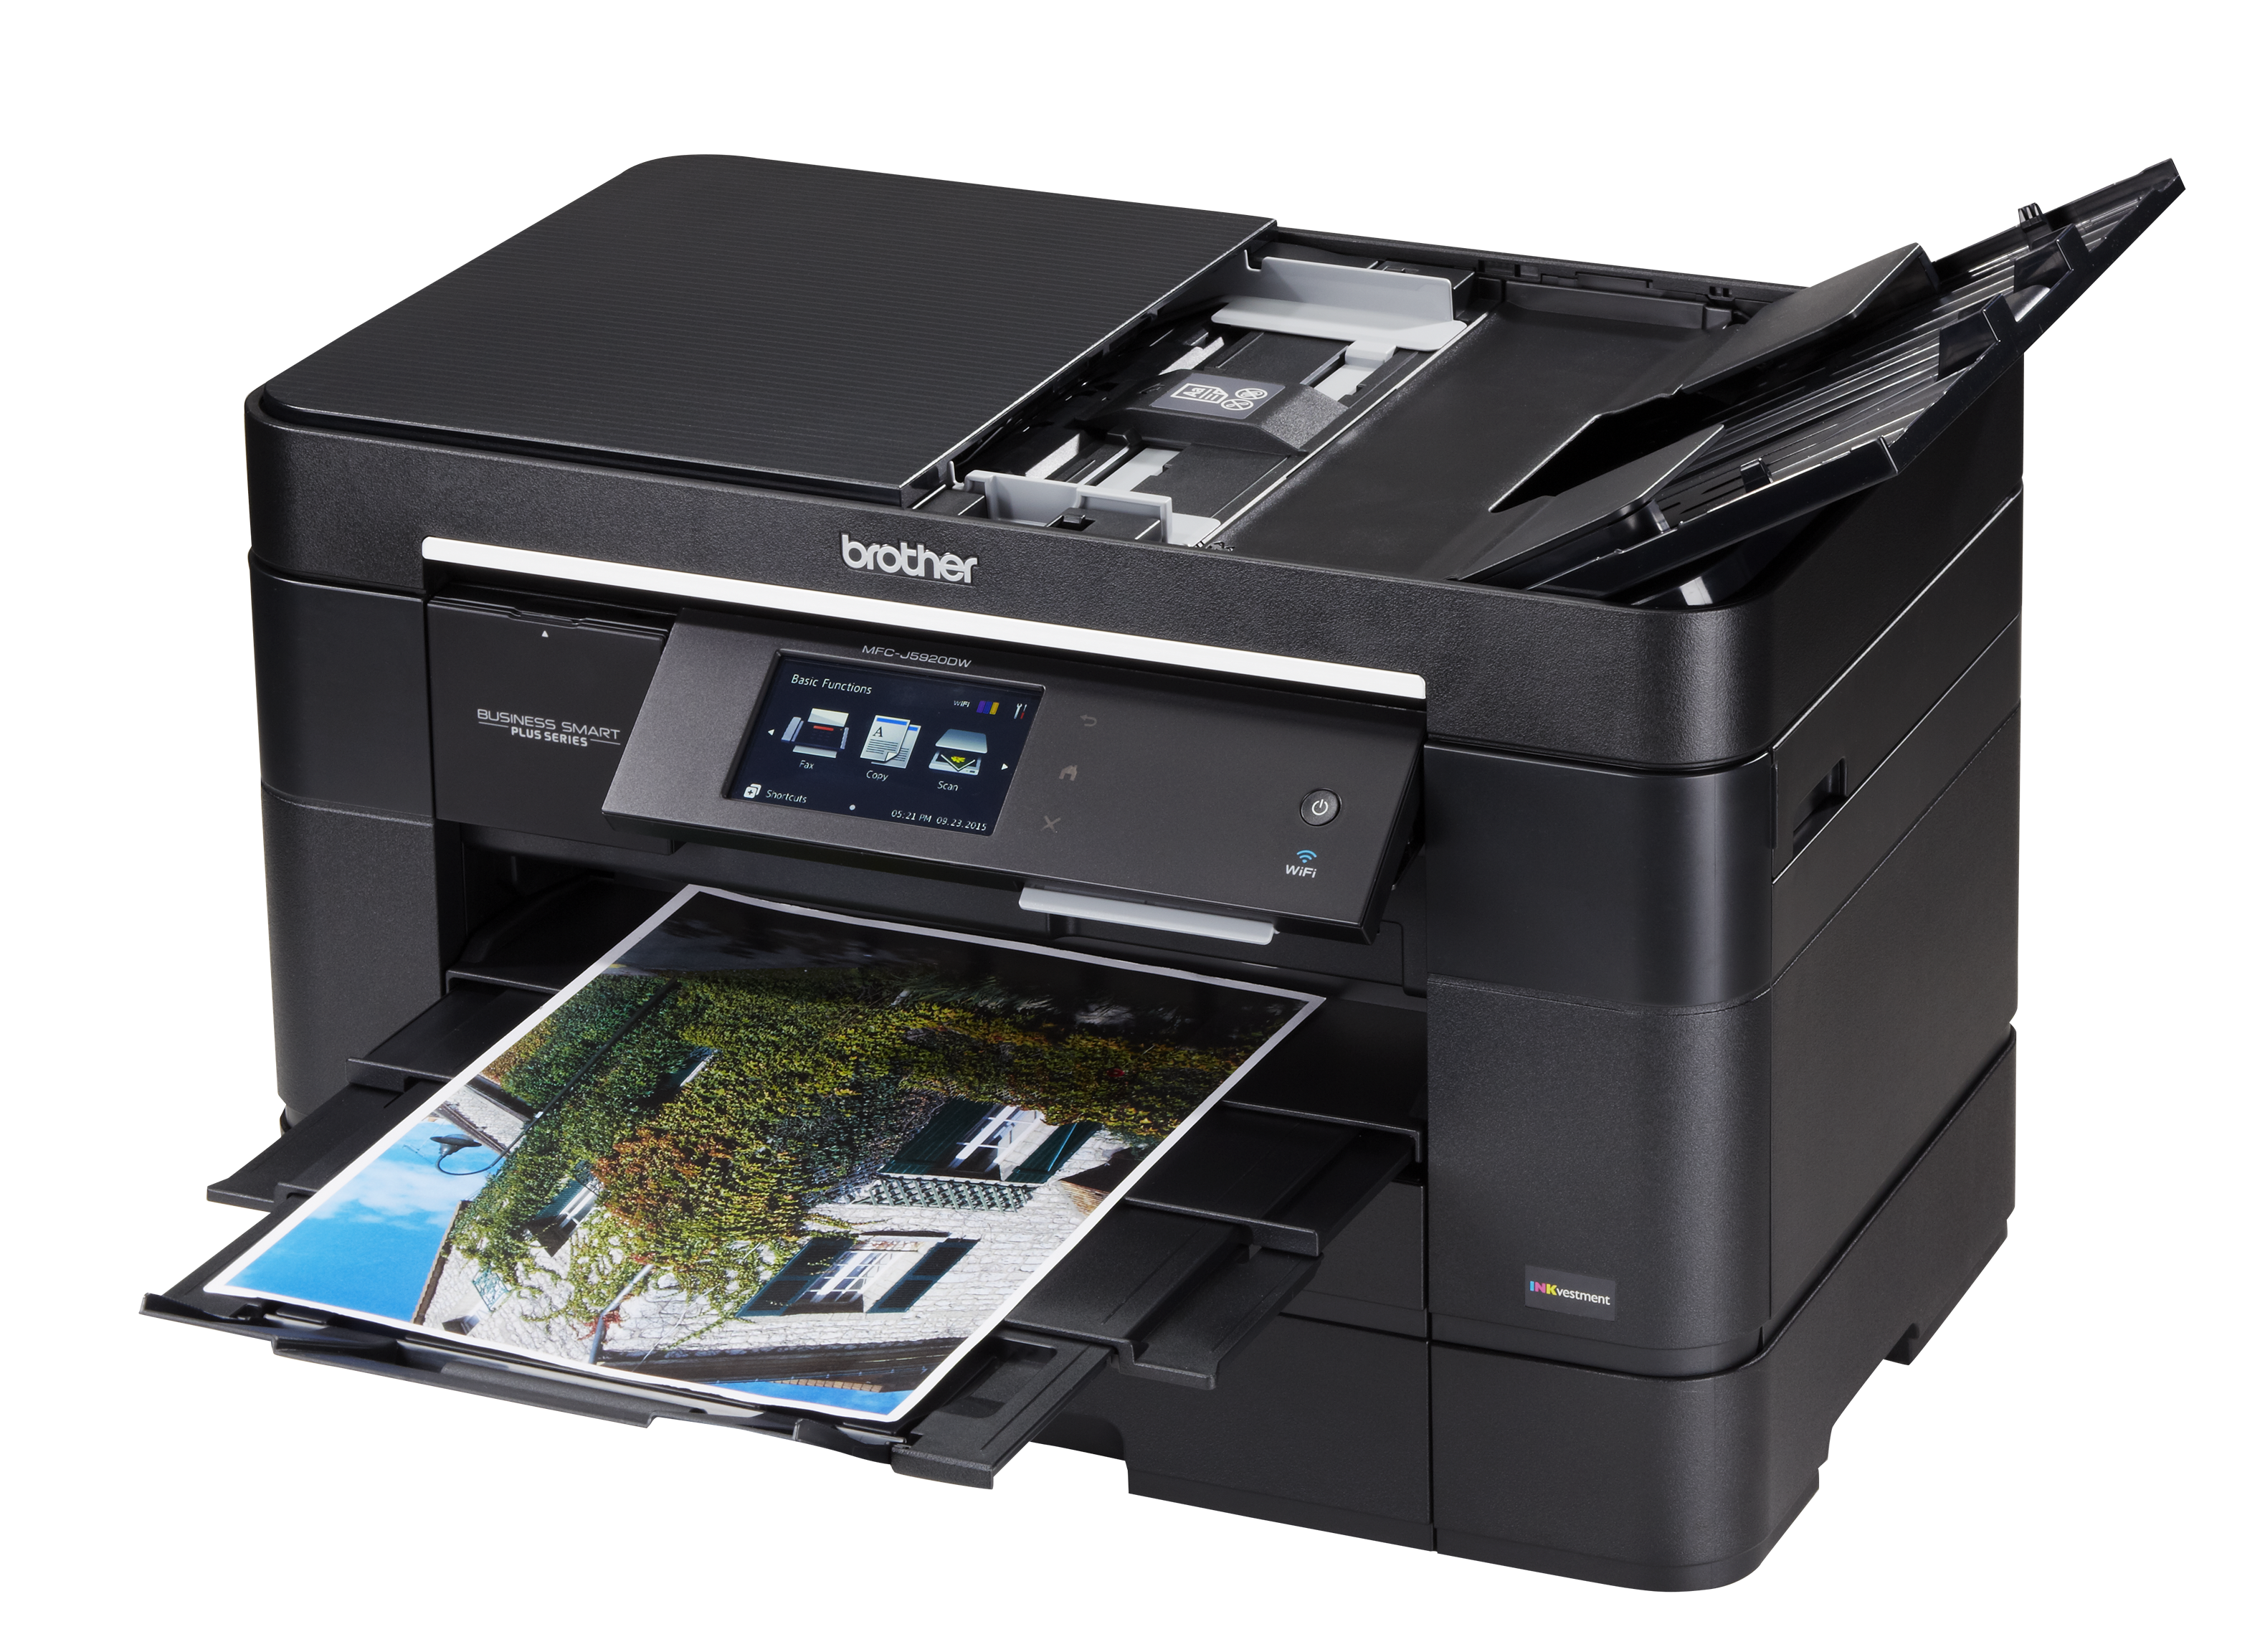 Brother print. Brother MFC-l2720. Бразер 2720 принтер. Brother MFC-l2720dw Series. Принтер МФС Л 2720.